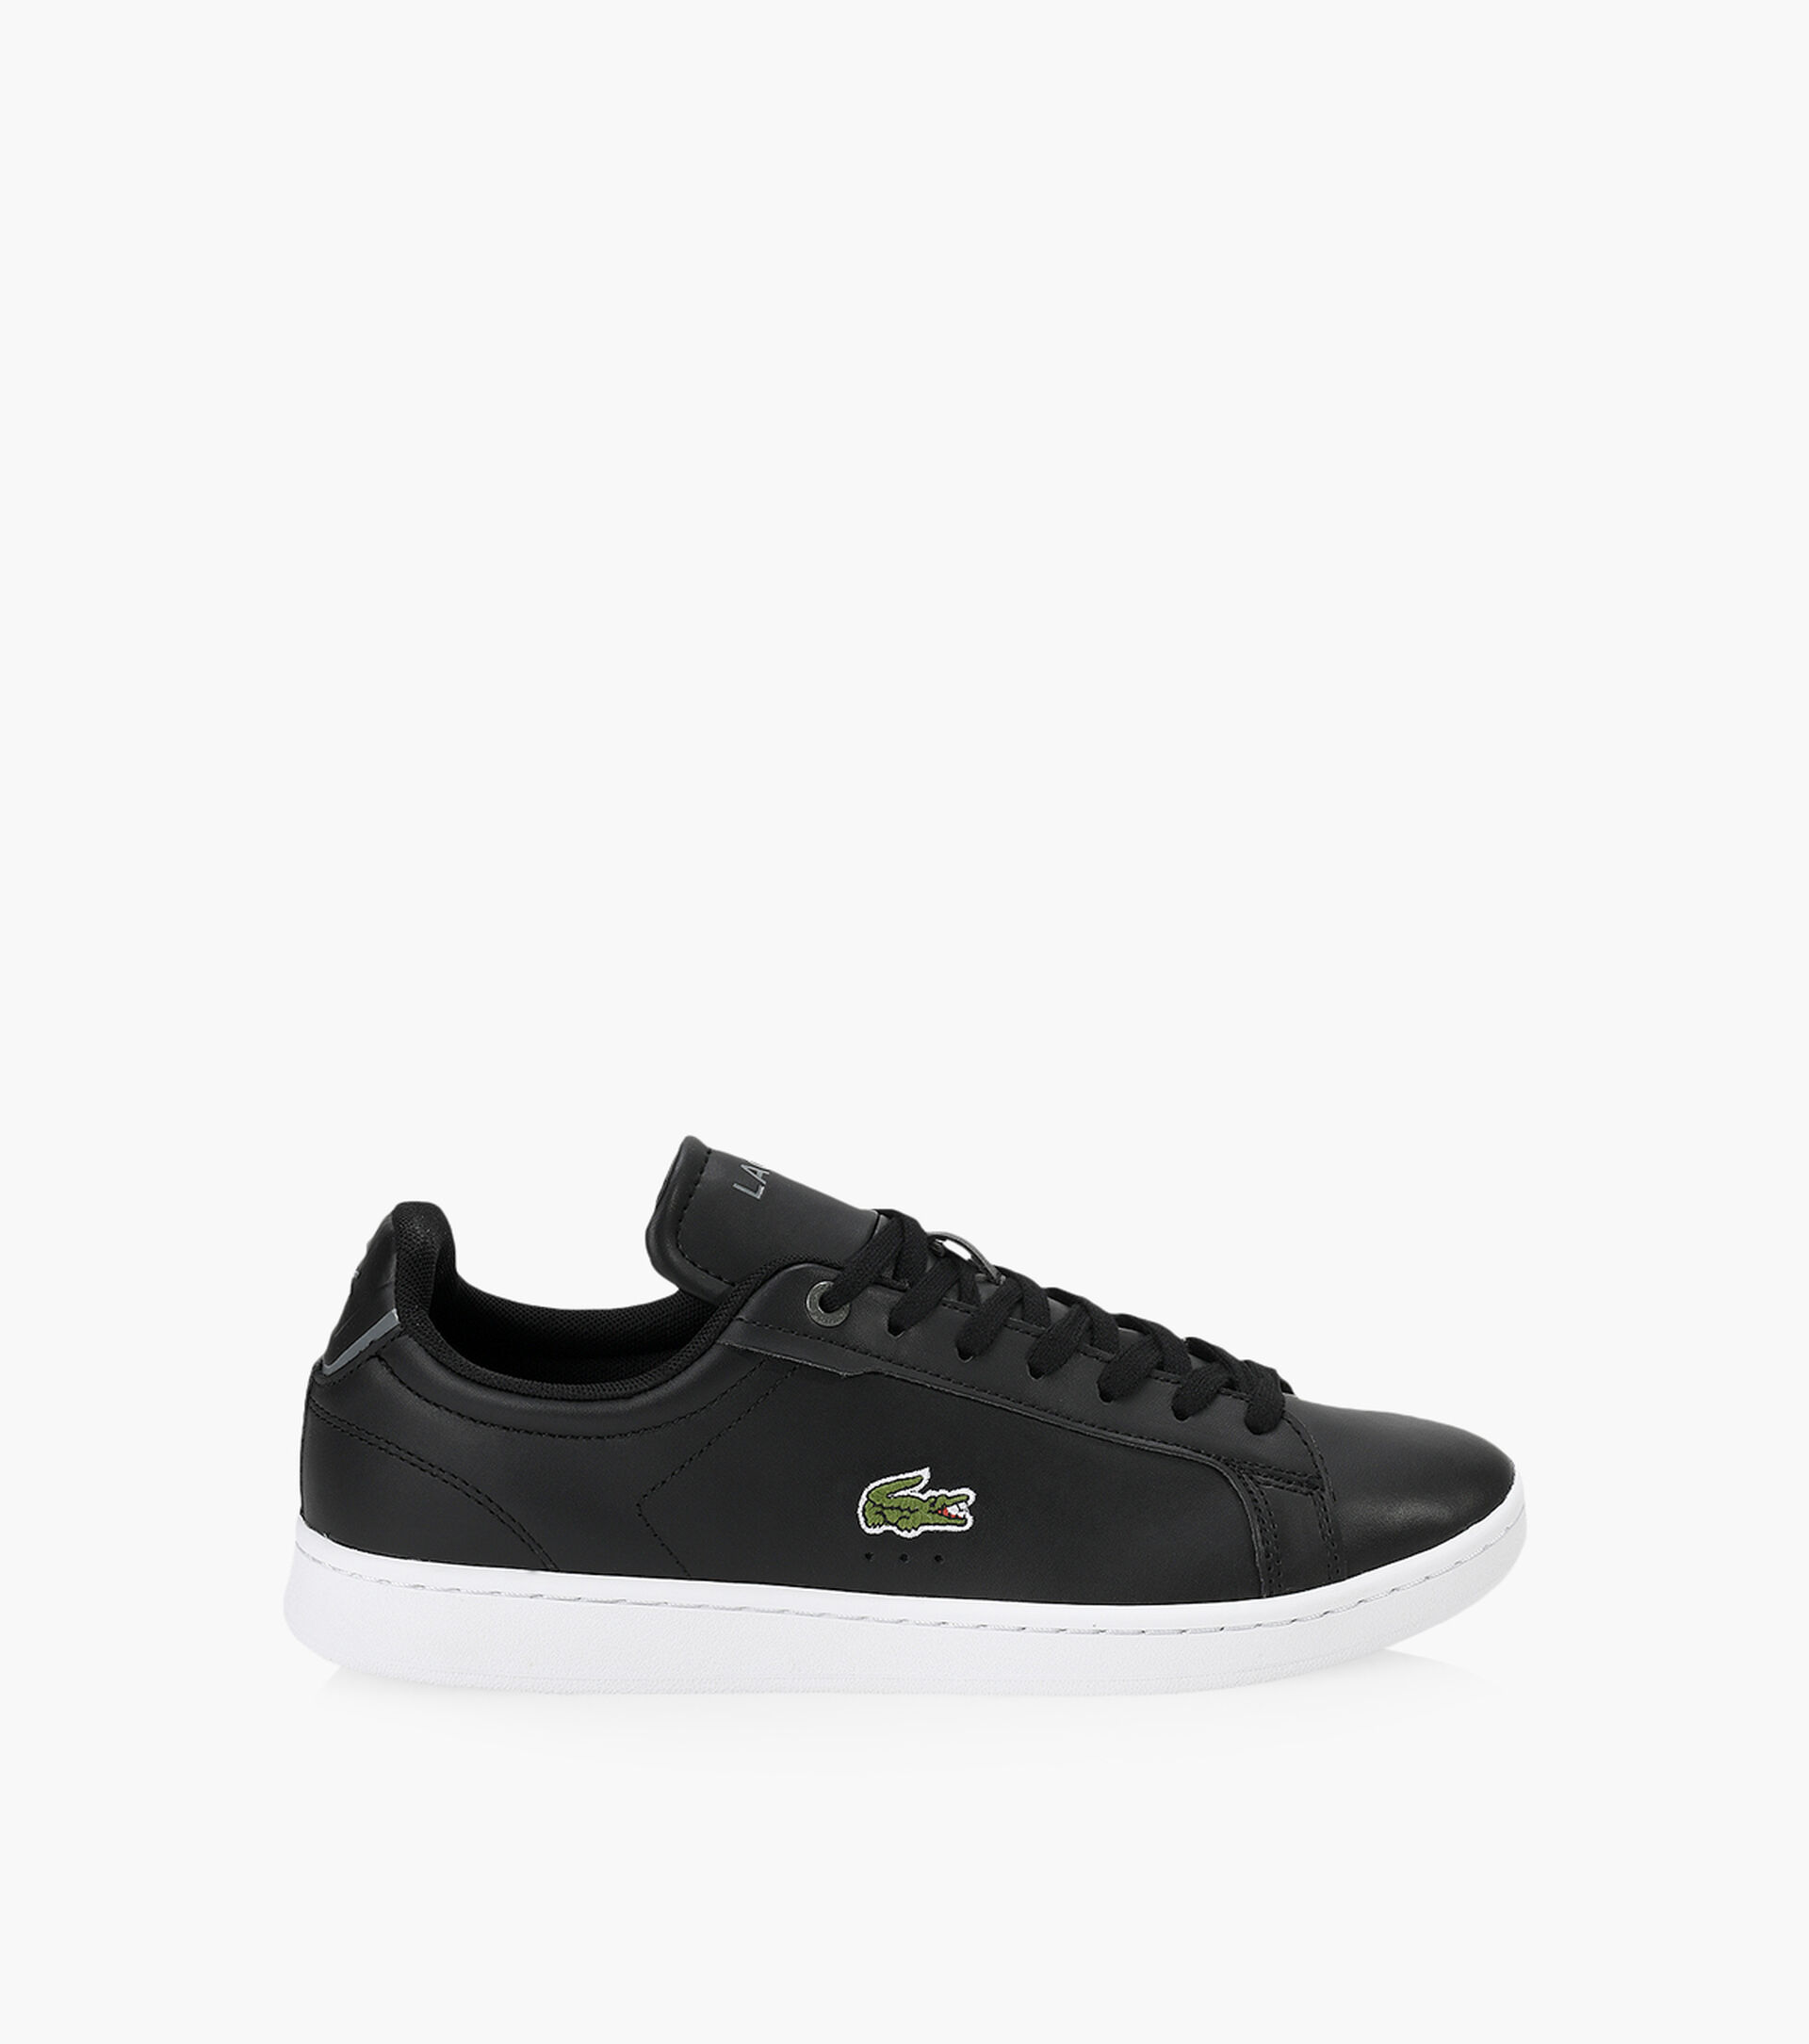 LACOSTE CARNABY PRO - Black Leather | Browns Shoes